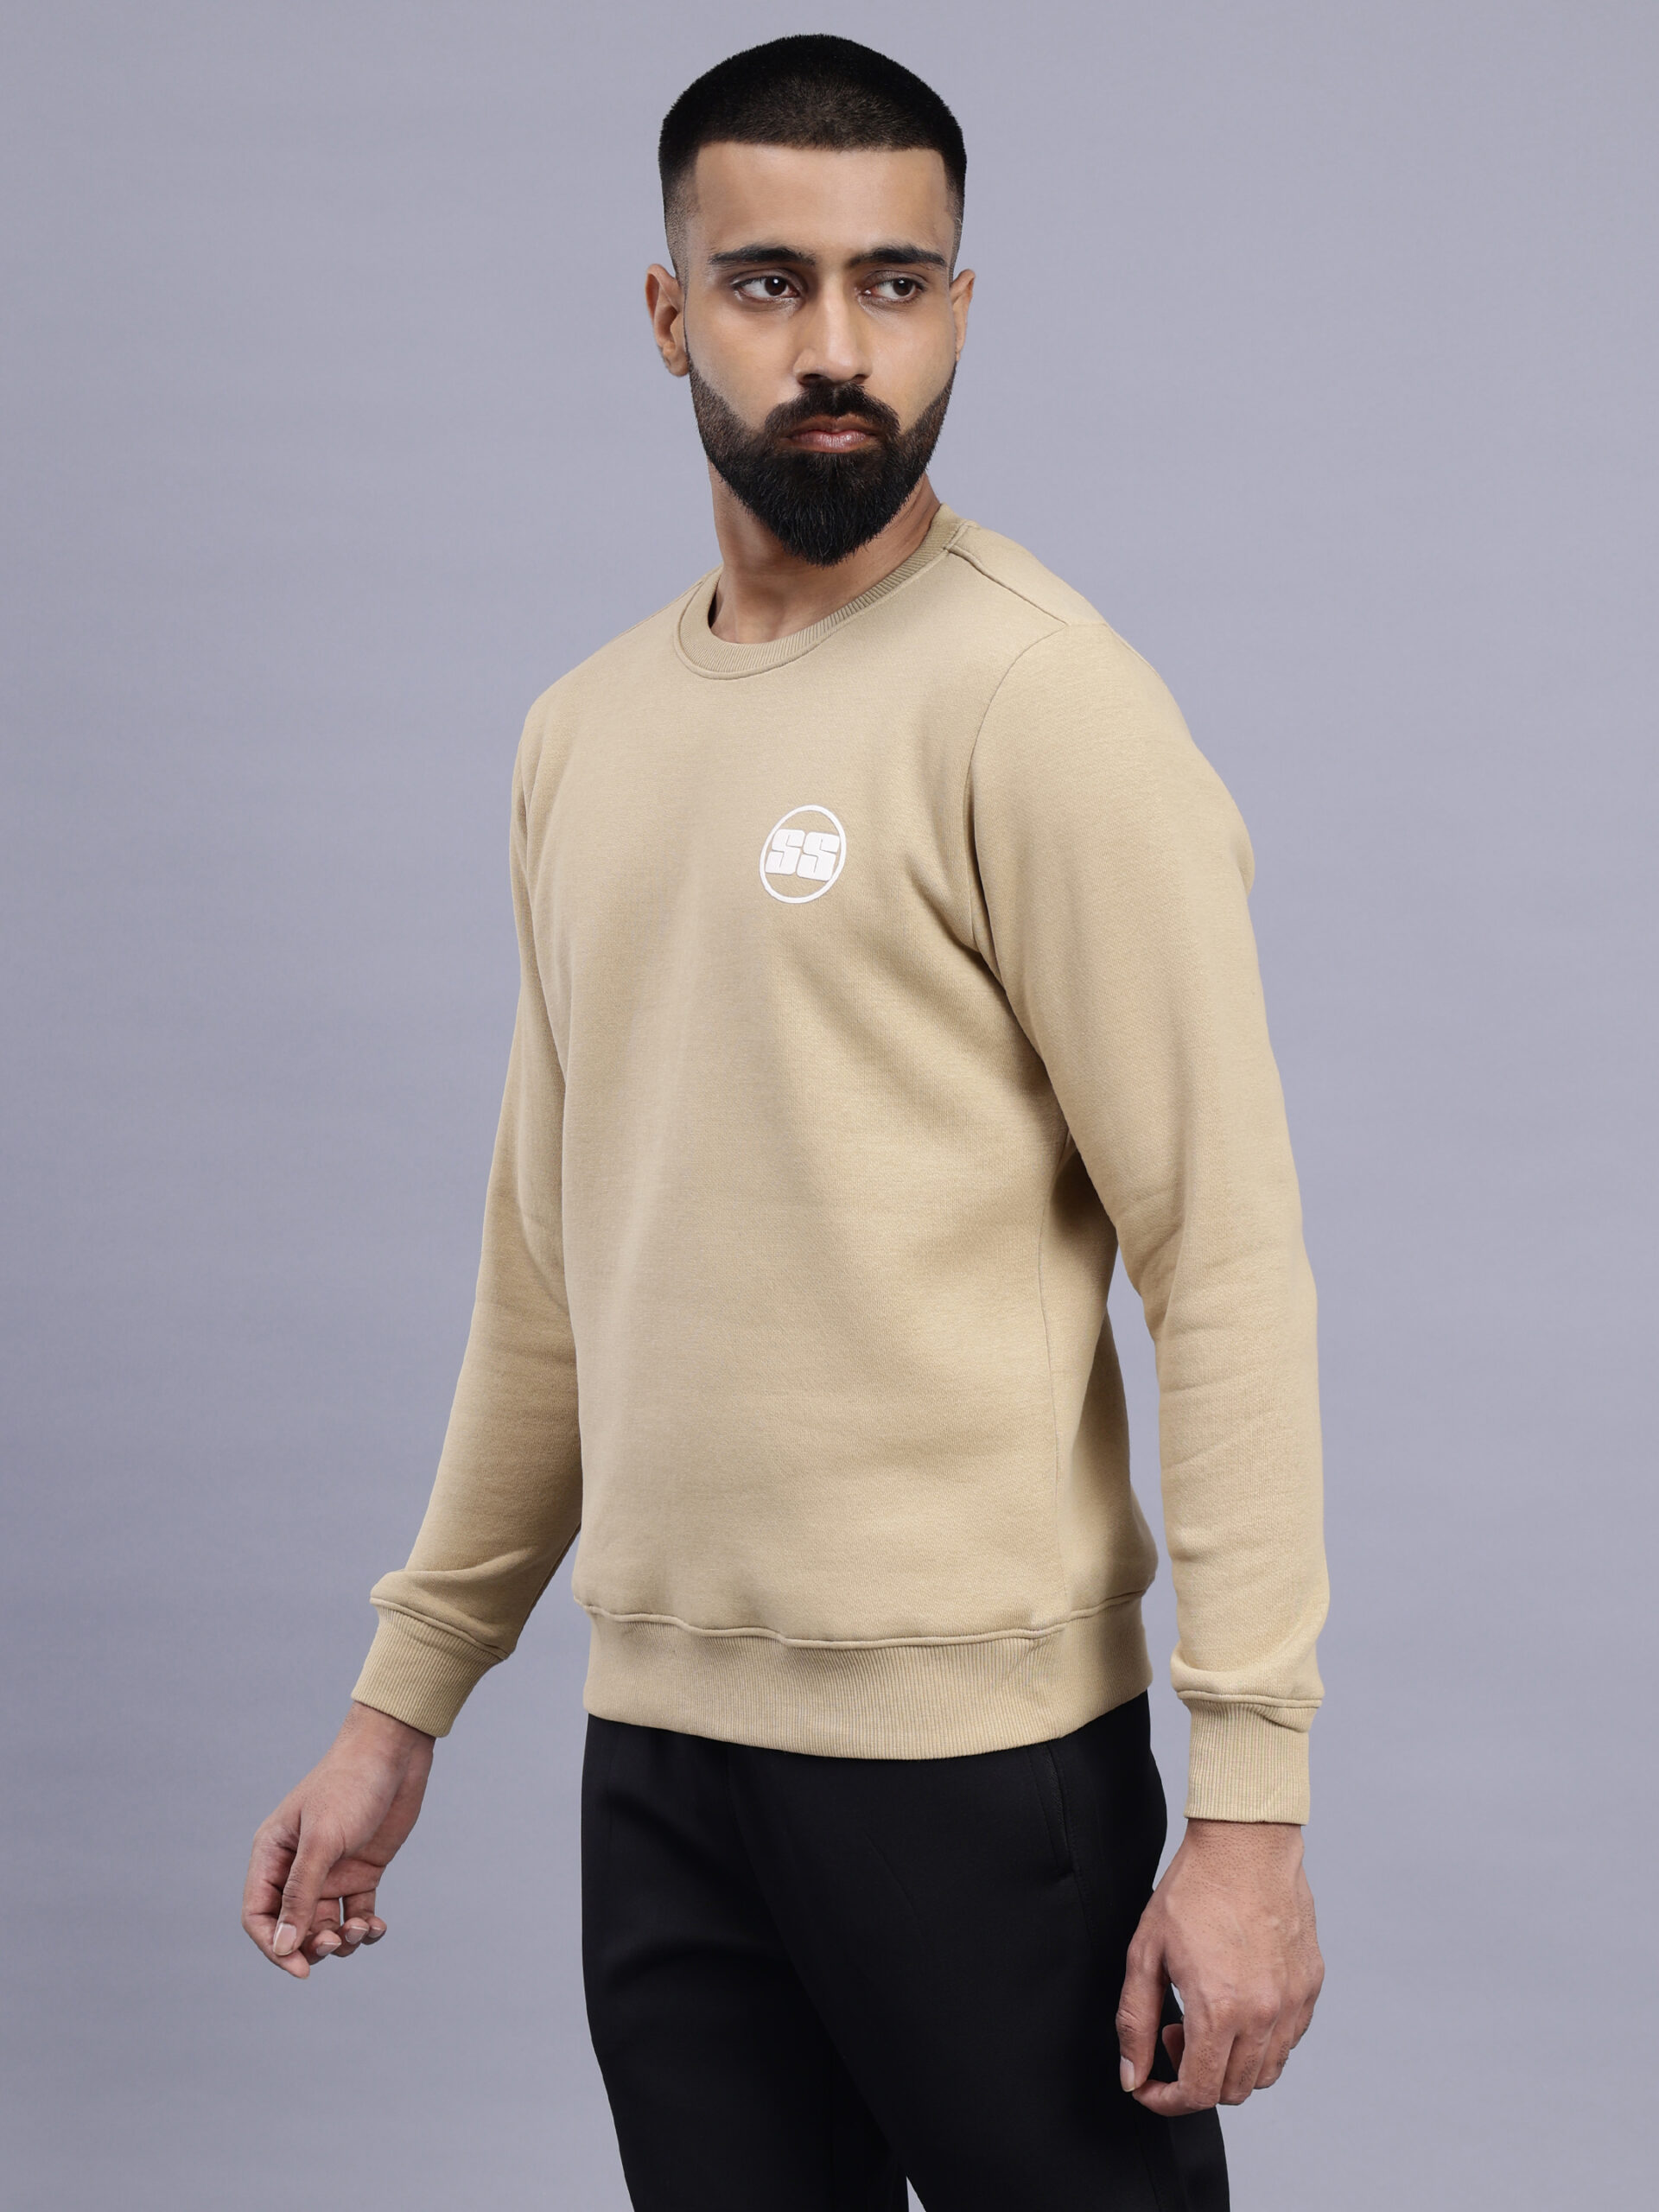 SS Supreme sweatshirt for Men and Boys (Beige Color) - SS Cricket